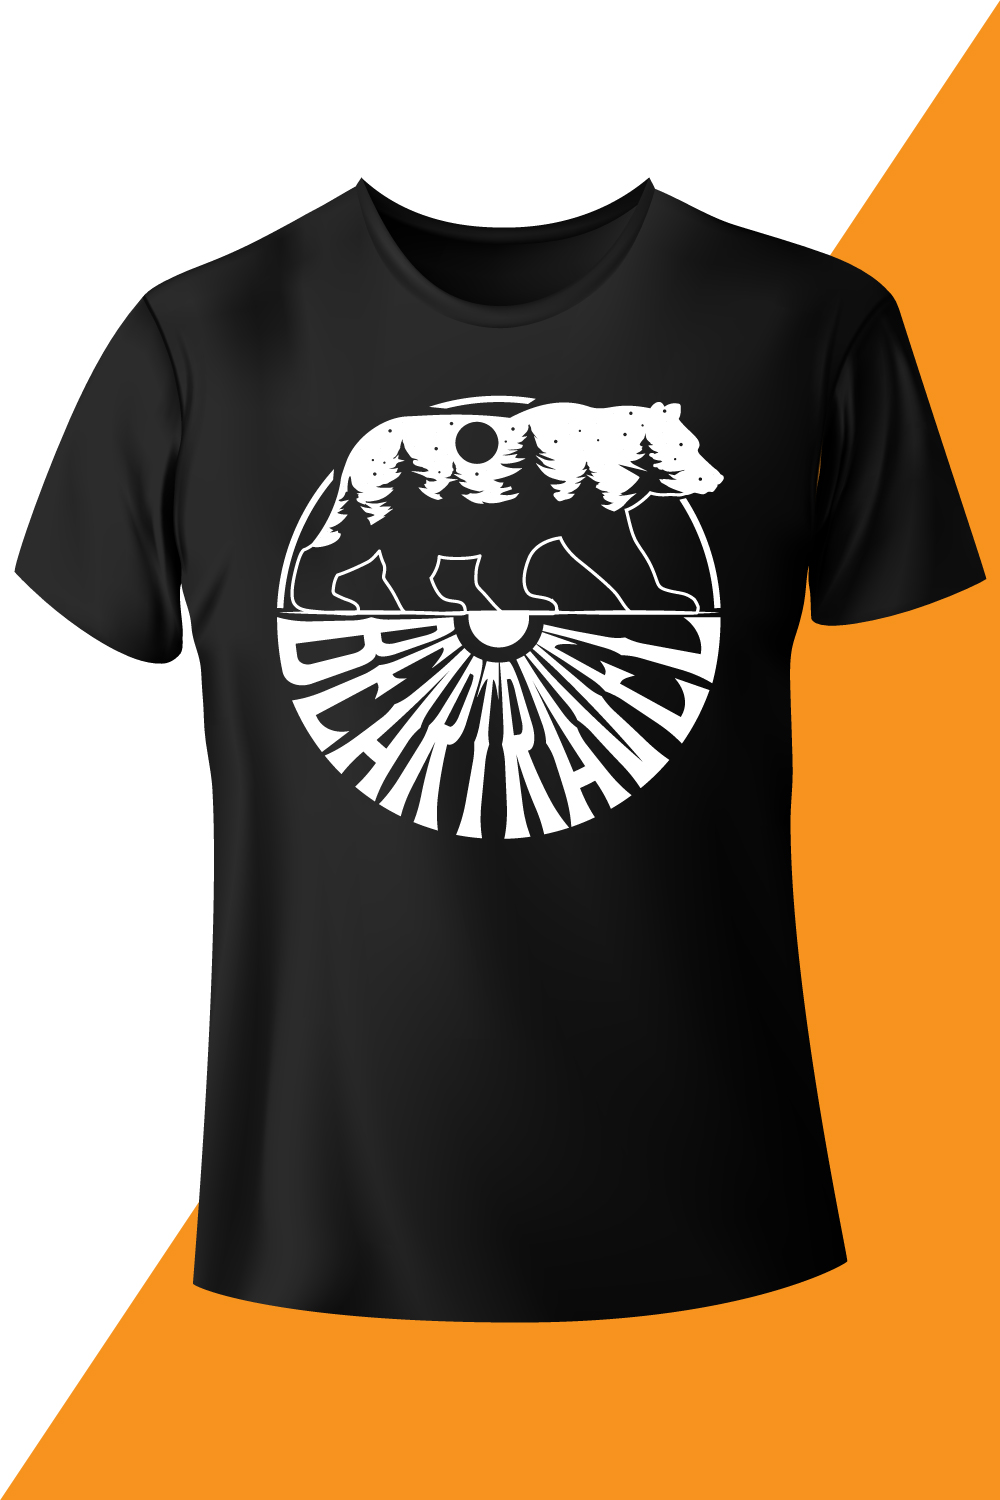 Image of a black t-shirt with beautiful Beartravel lettering.